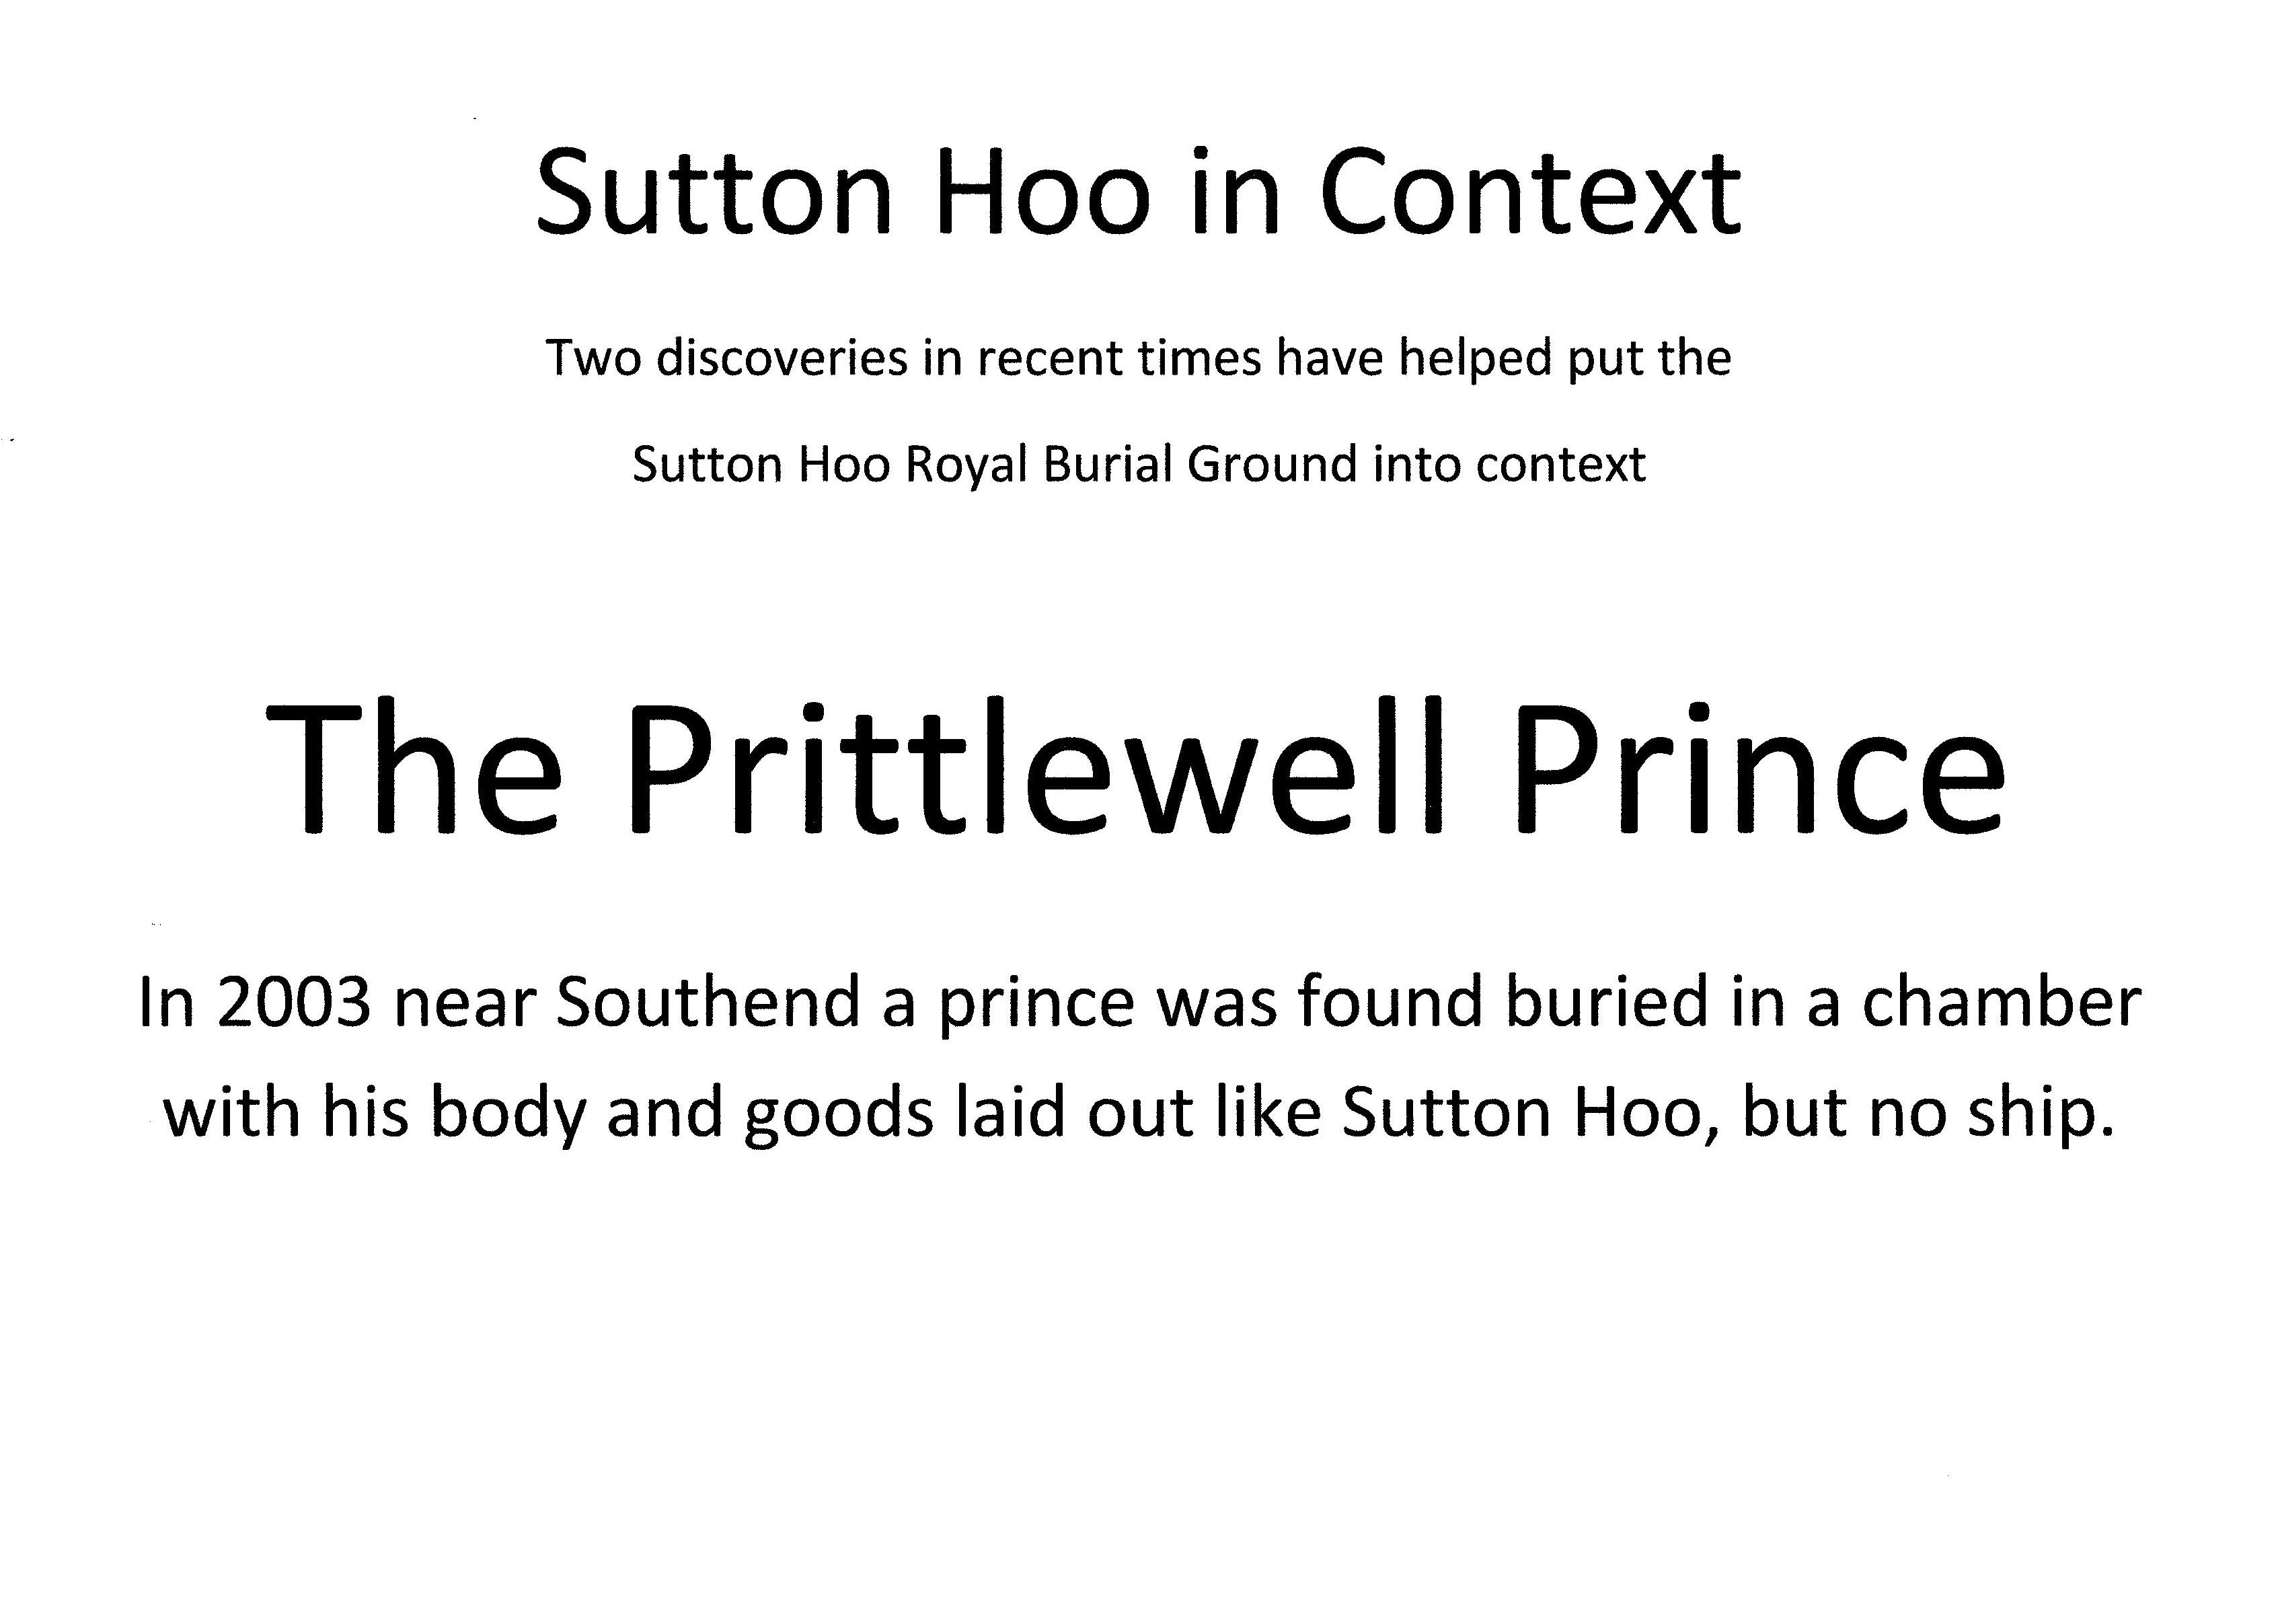 5-00 Sutton Hoo in context - The Prittlewell Prince